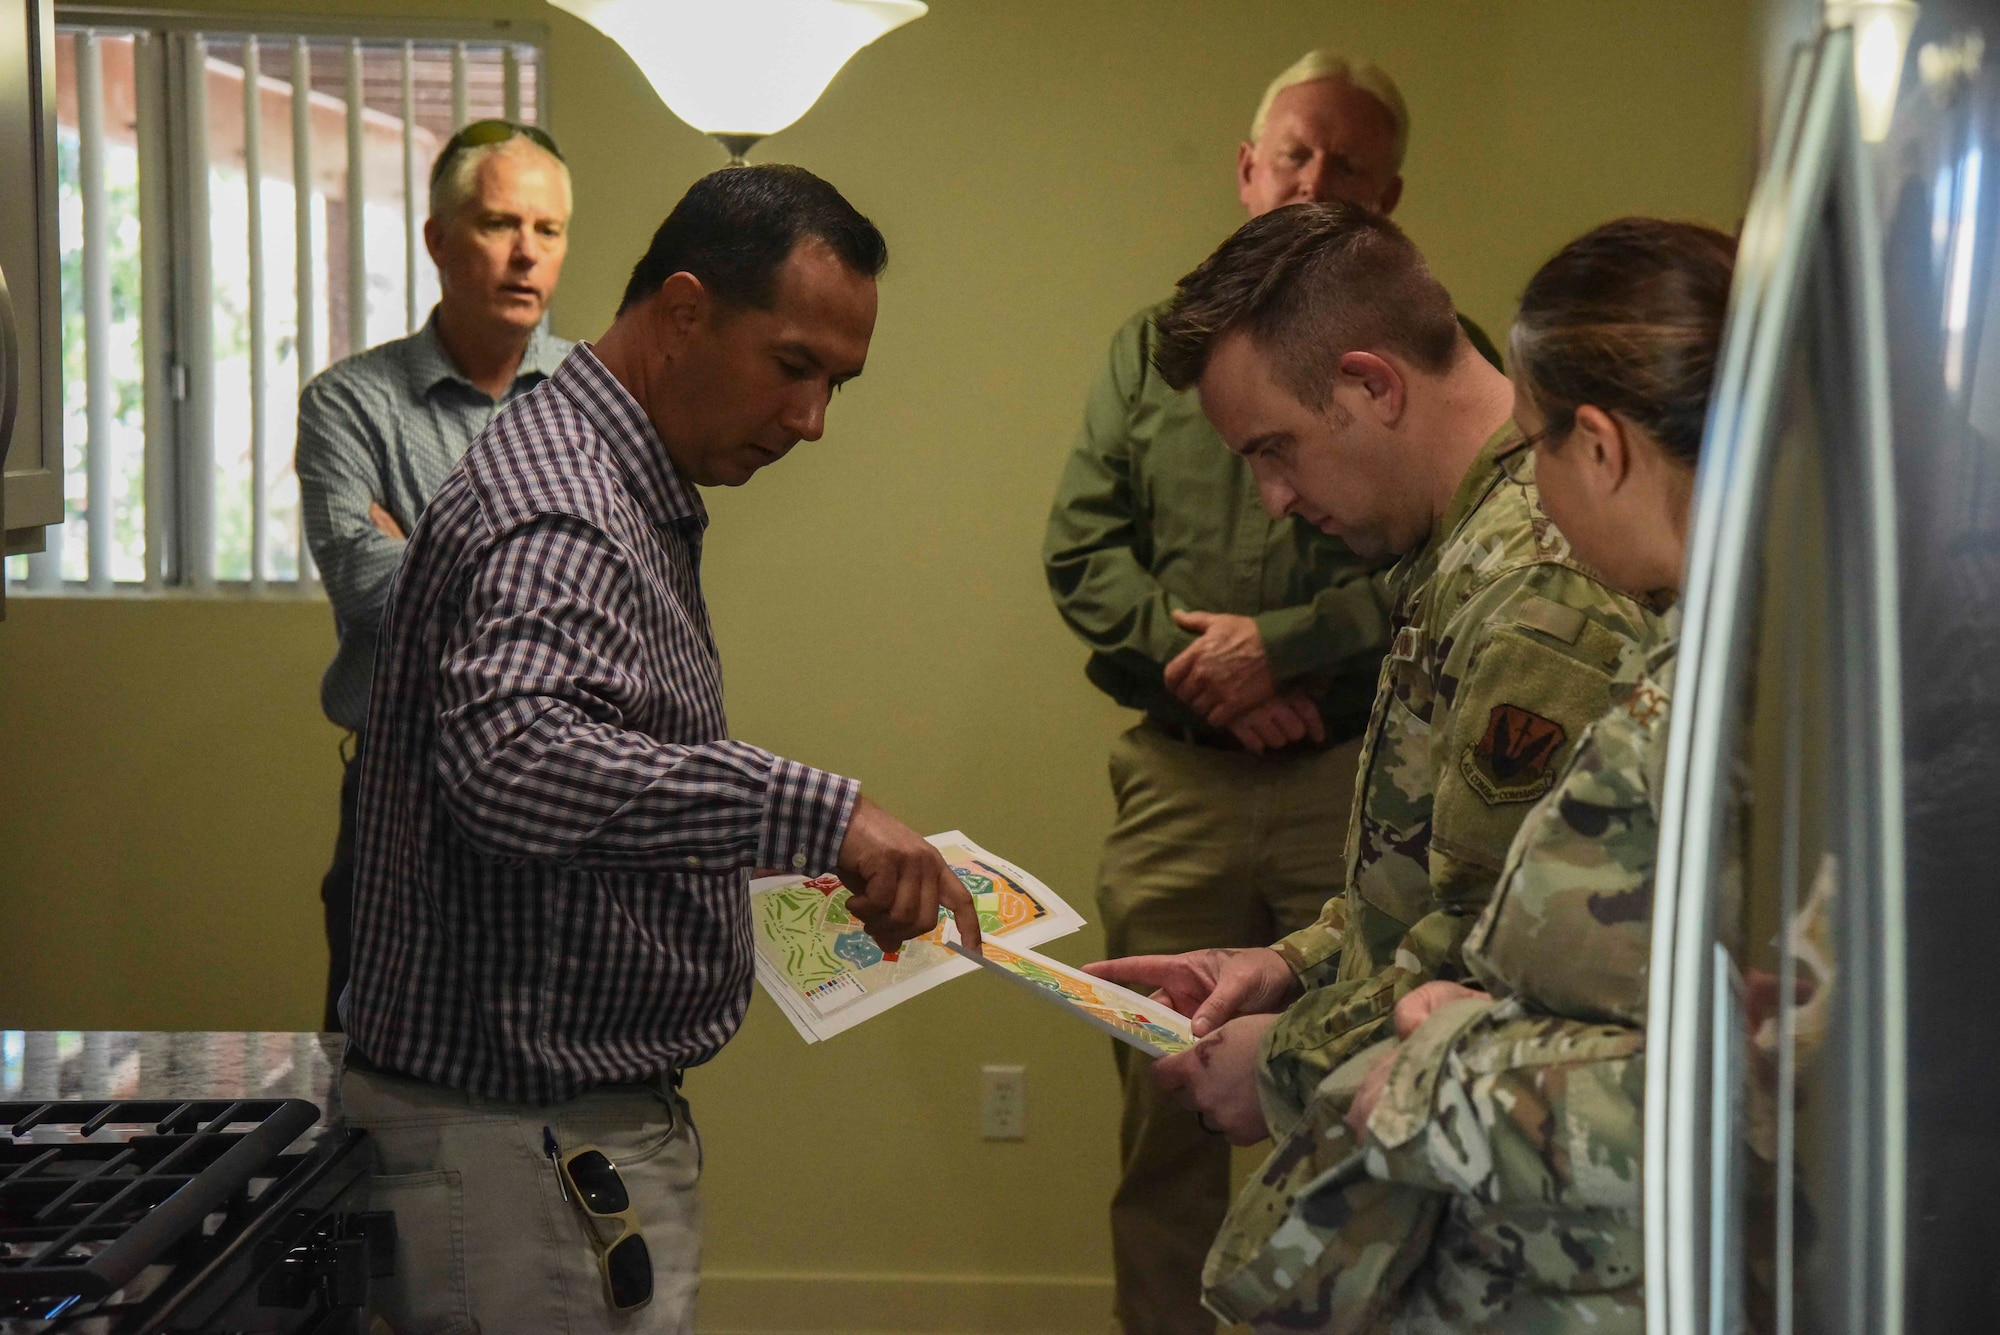 A photo of a man showing the layout of a home to Airmen.